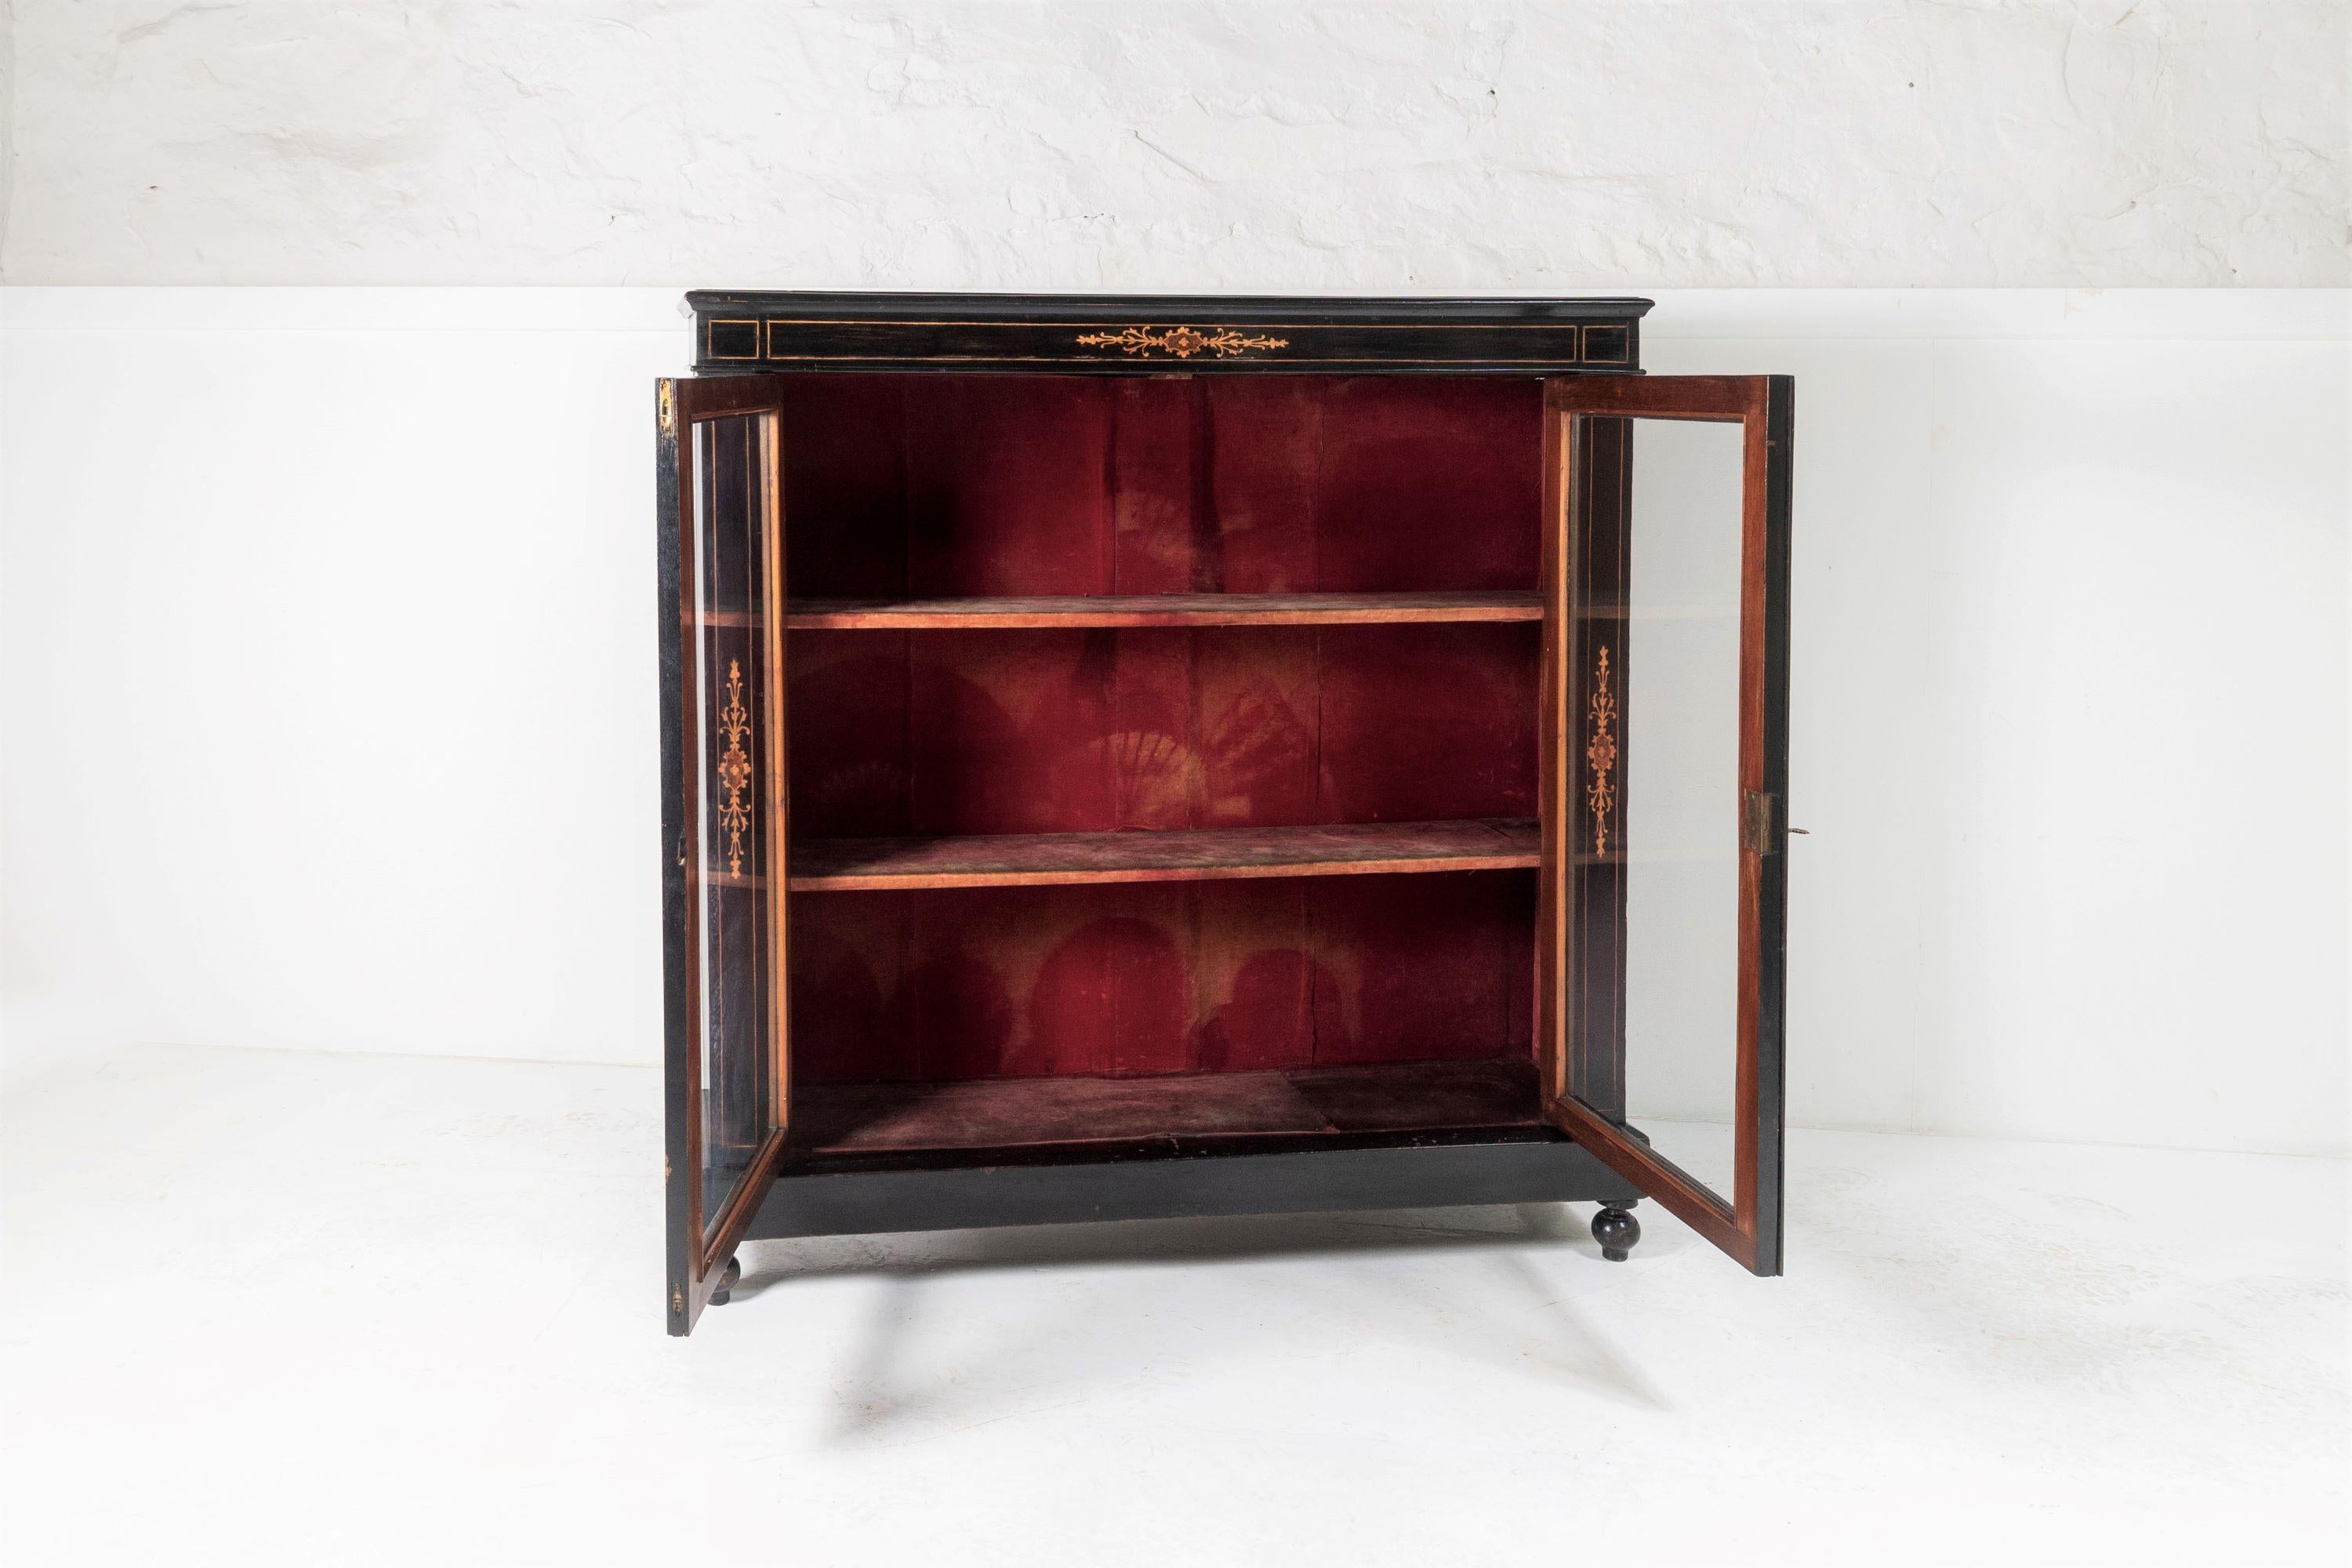 A well proportioned Victorian peer cabinet, ebonised with fruitwood inlay and standing on four turned bobbin feet.
Two opening glazed doors, retaining its original lock and key, opening to interior shelves, fully lined with original red velvet